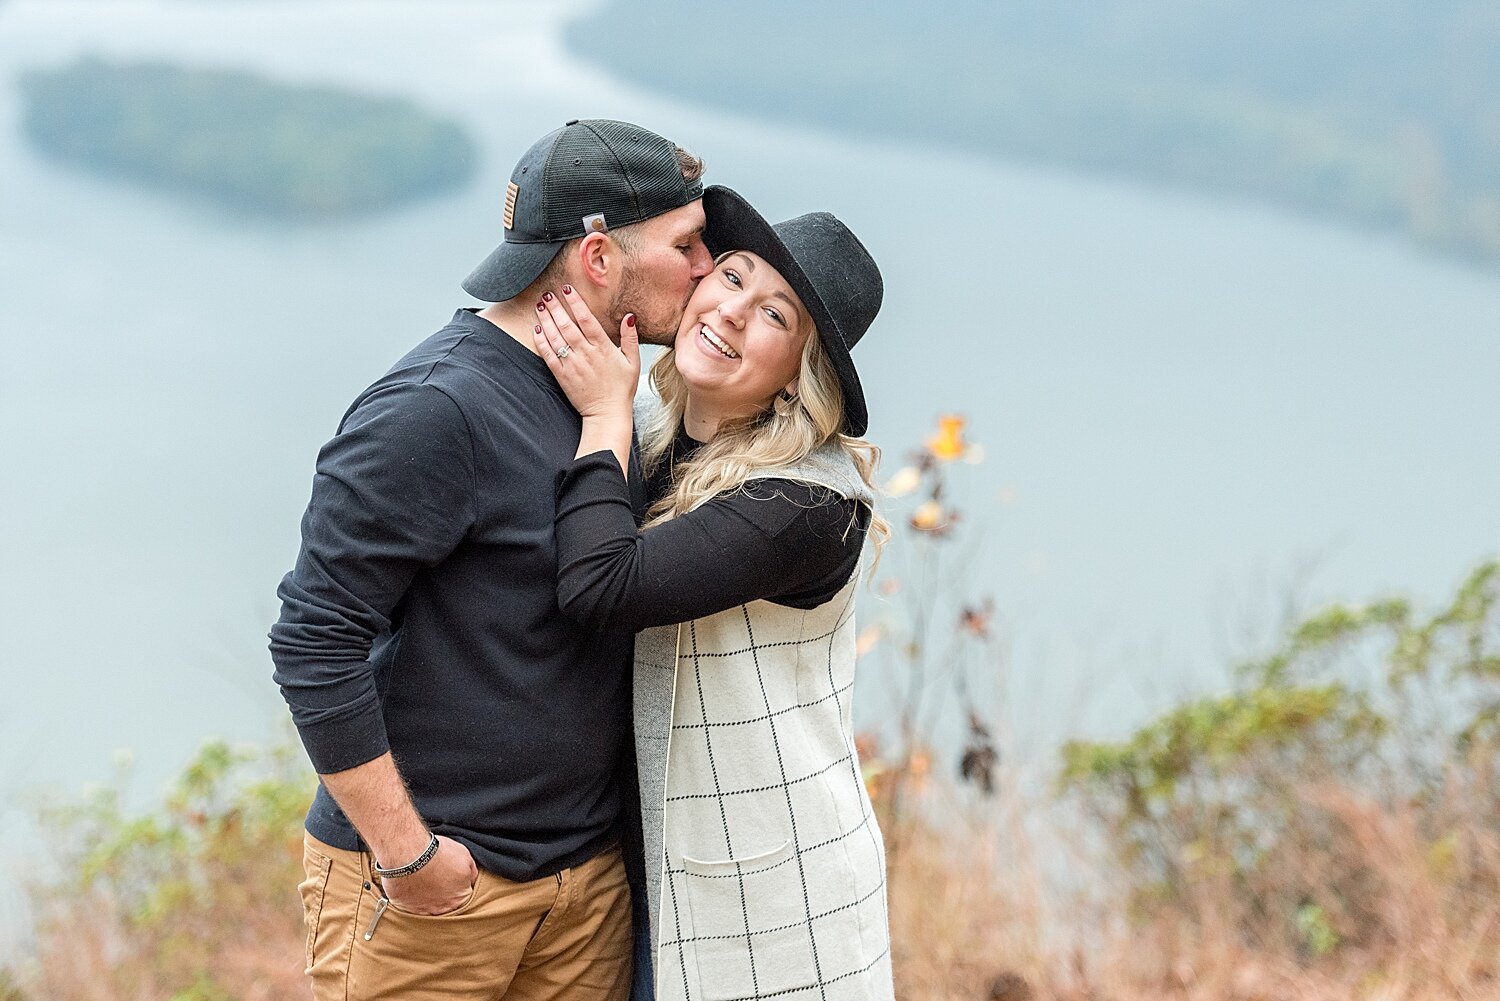 Pinnacle Overlook Holtwood PA Surprise Proposal Photography_8743.jpg